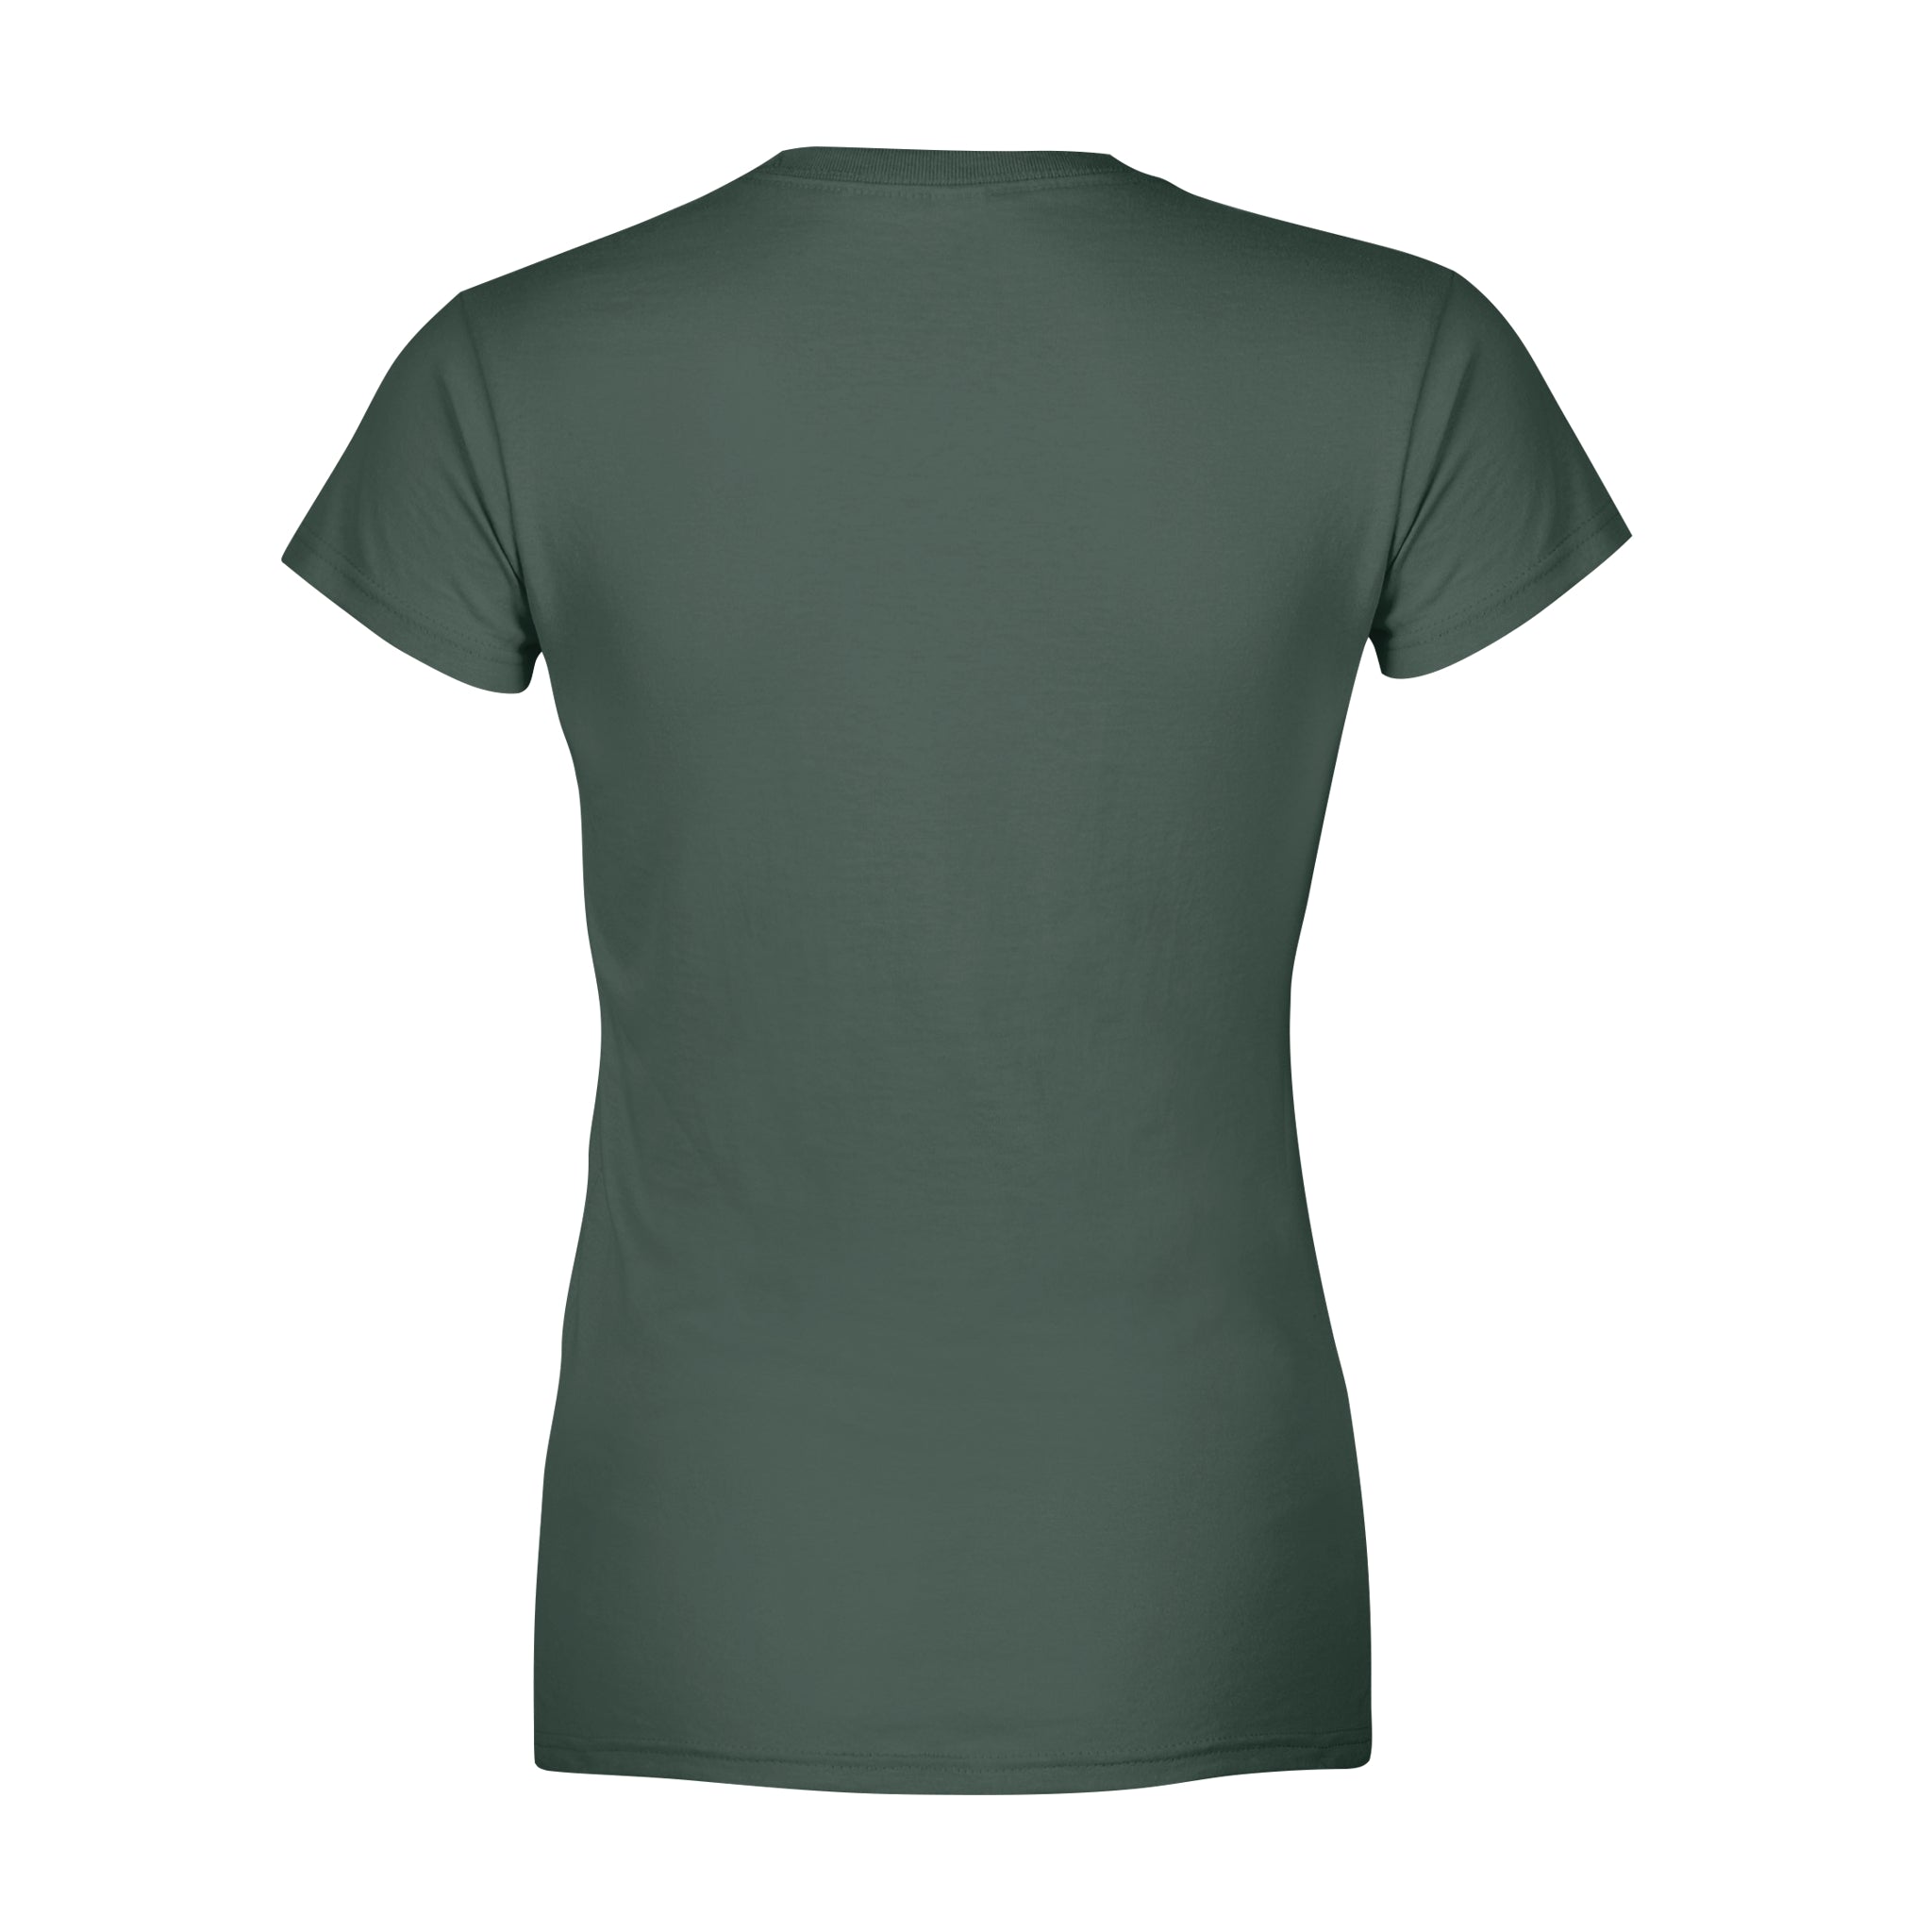 It's Time For A New Adventure -  Women's T-shirt